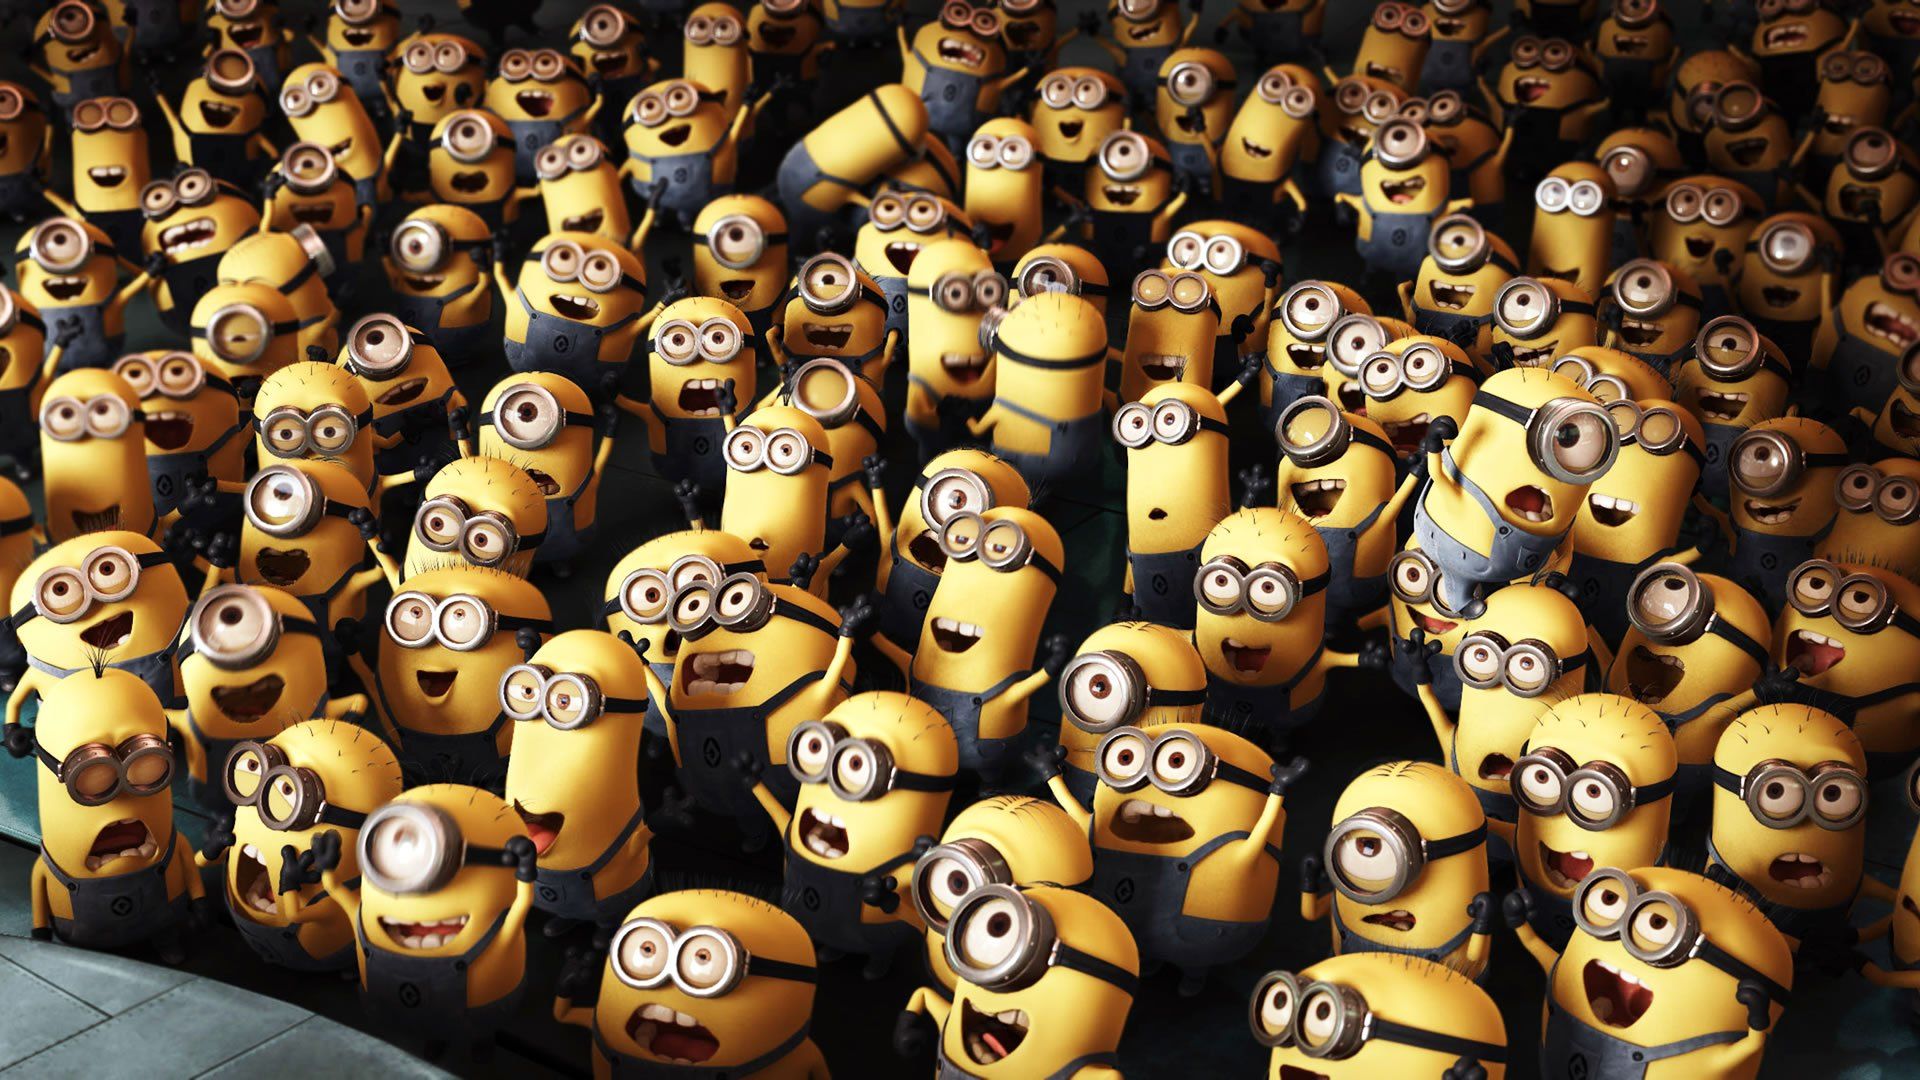 Despicable Me Minions Wallpapers | Despicable Me Minions